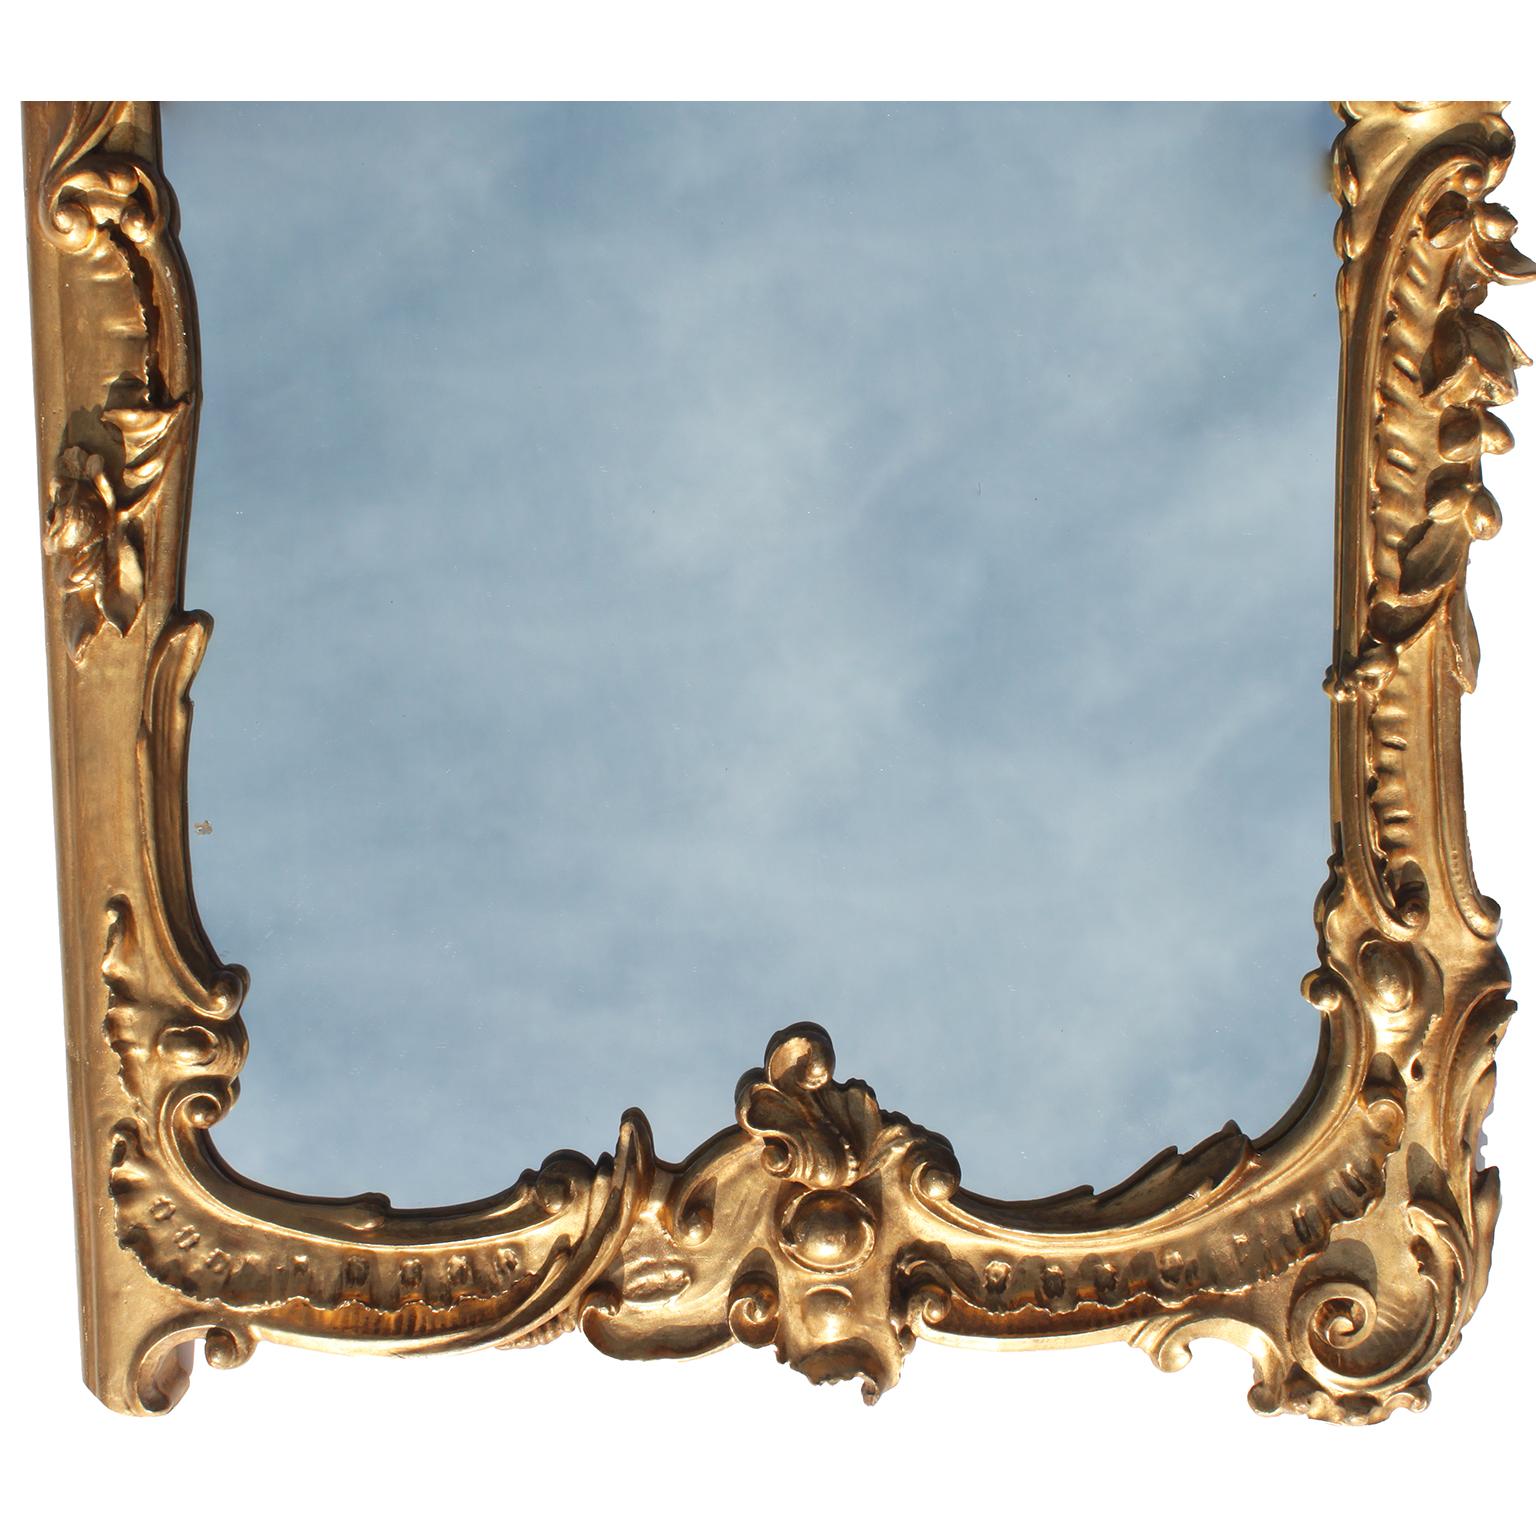 Whimsical French 19th-20th Century Belle Époque Gilt-Wood Triptych Putti Mirrors For Sale 7